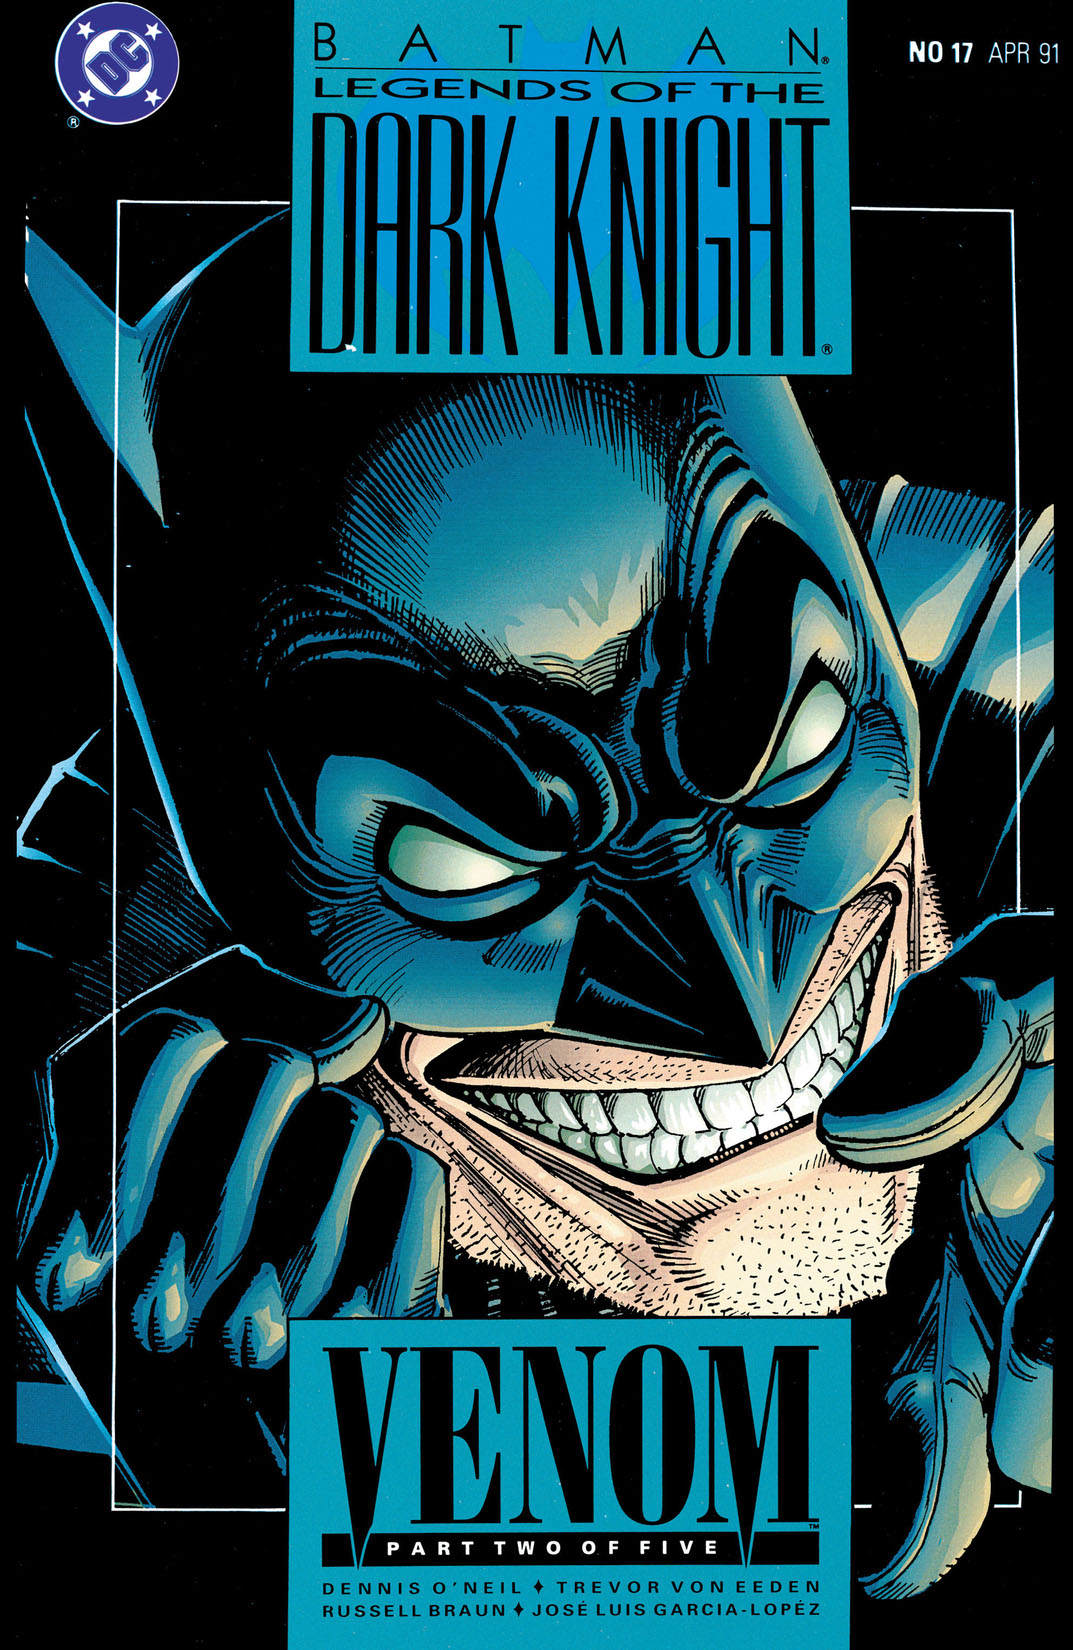 Batman: Legends of the Dark Knight #17 preview images